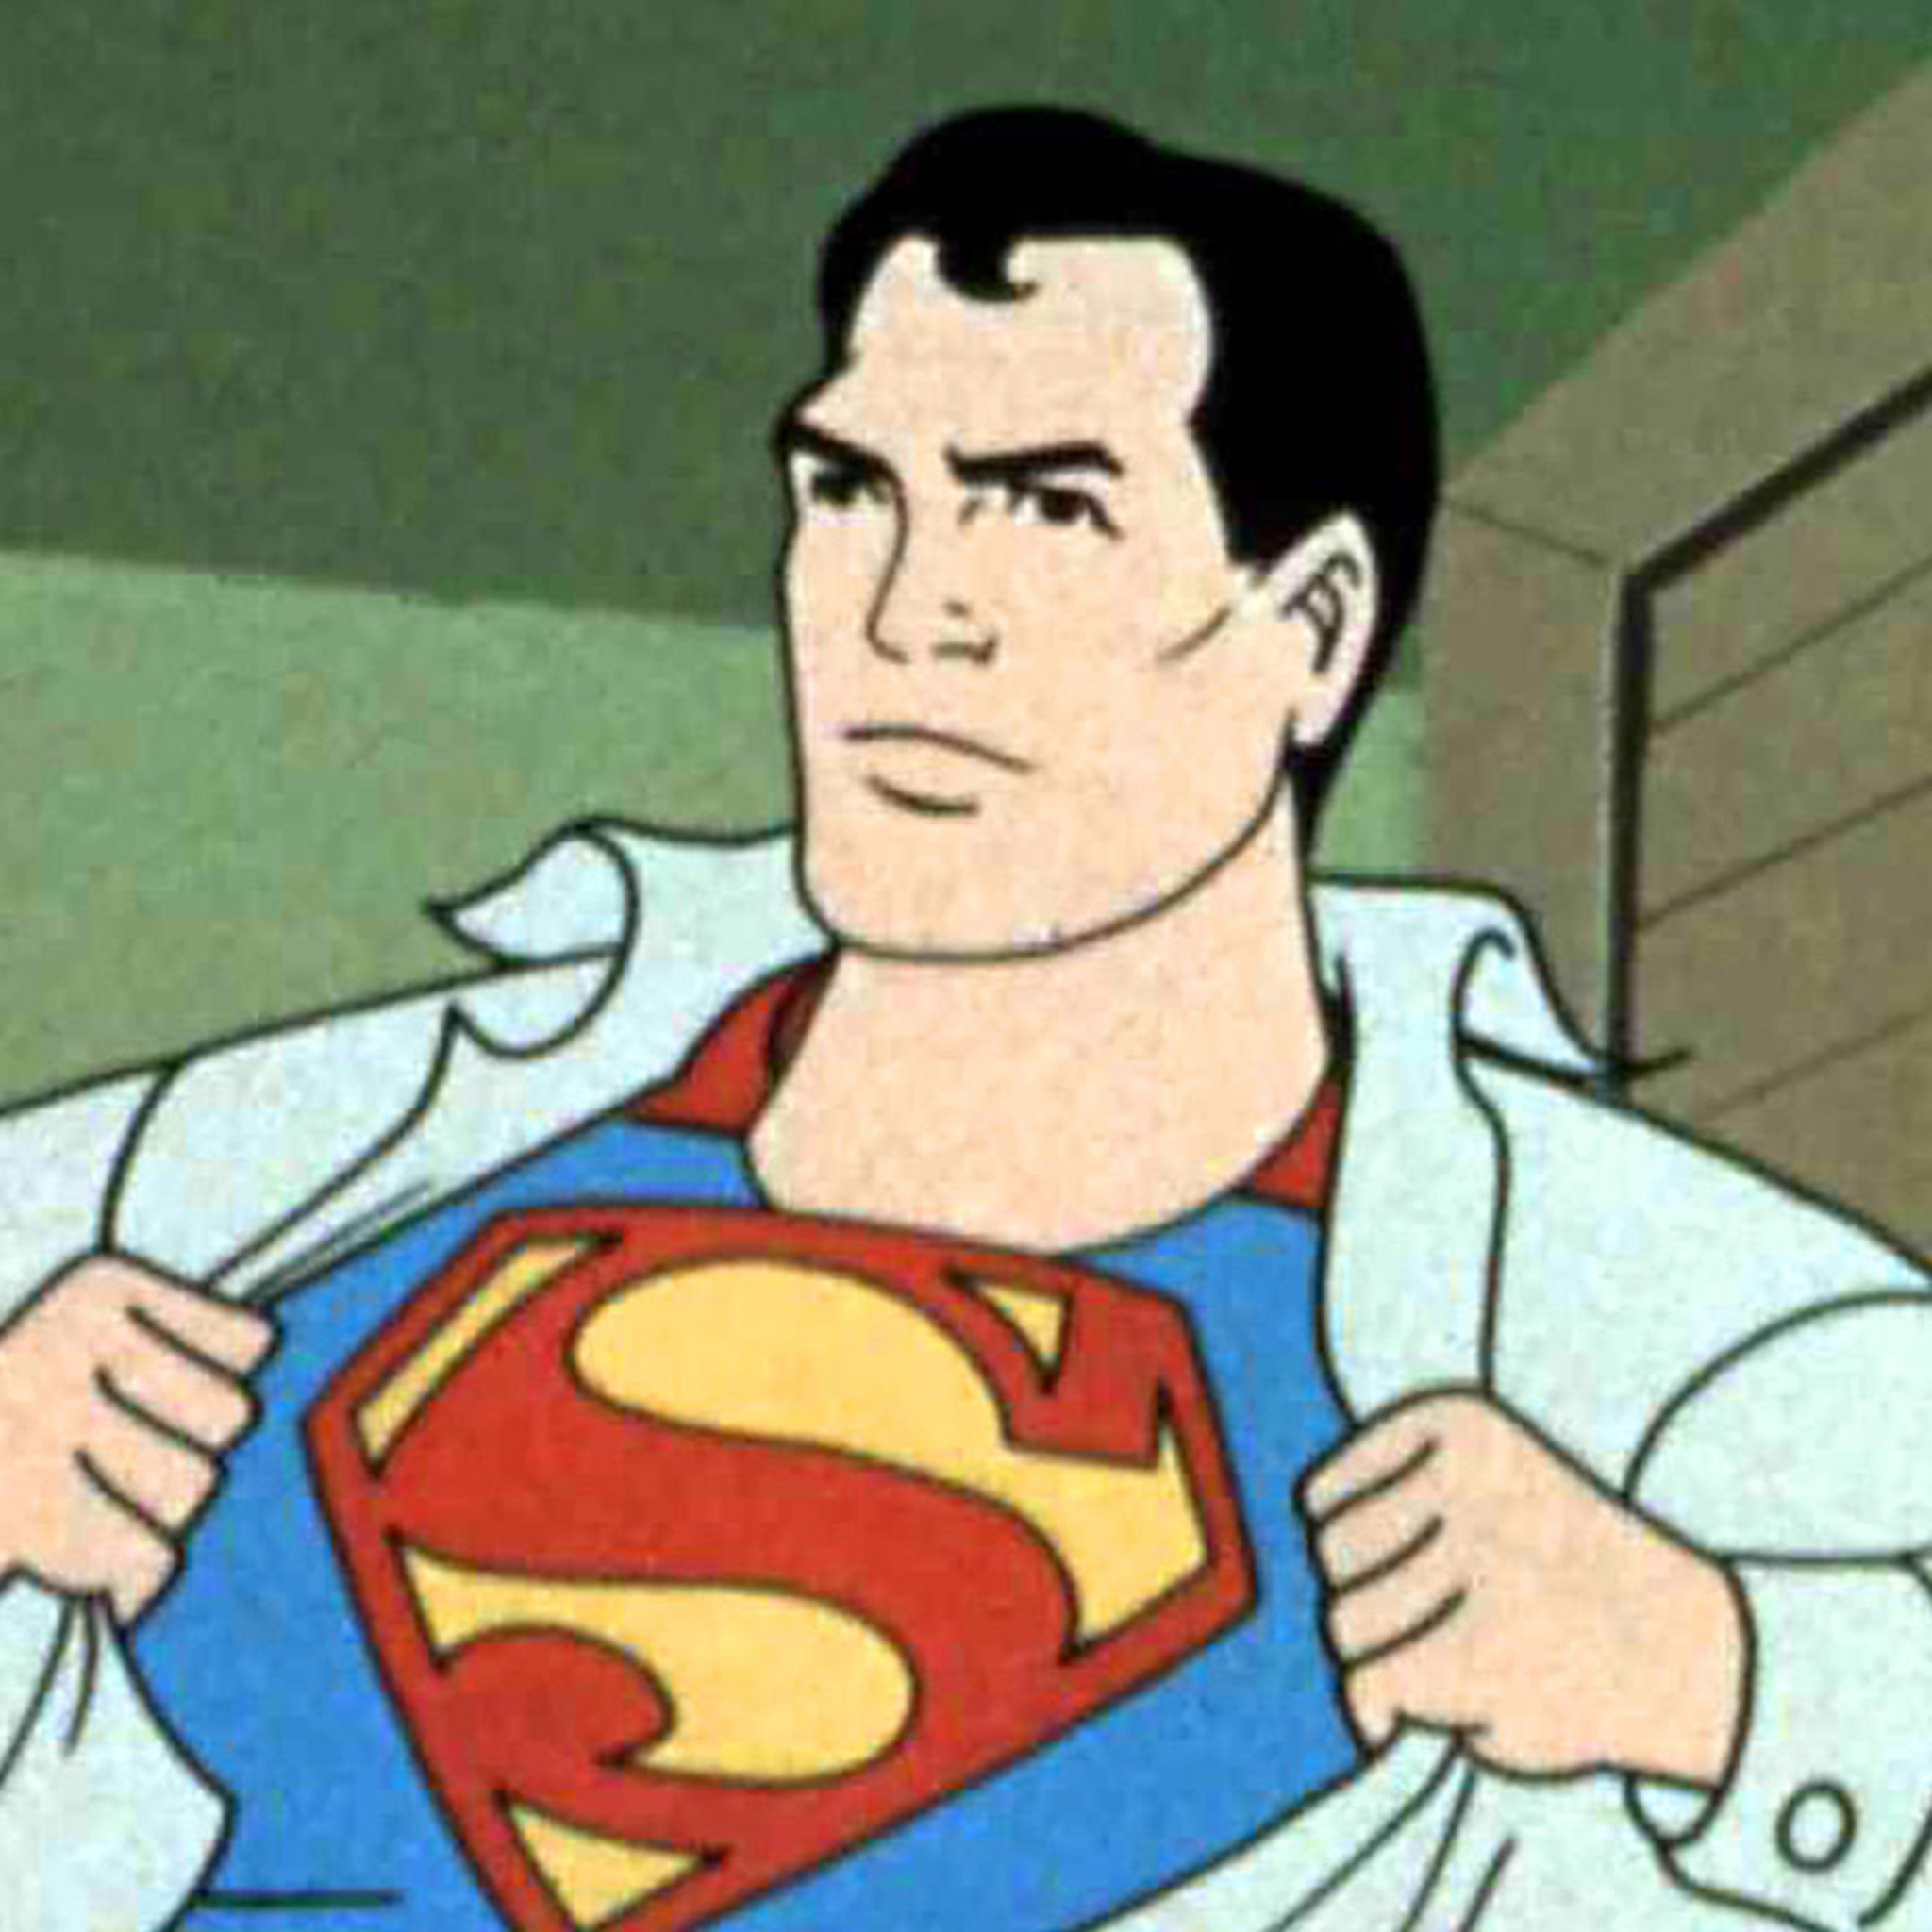 Superman Being Labeled a 'Boring' Hero Sparks Fierce Defense